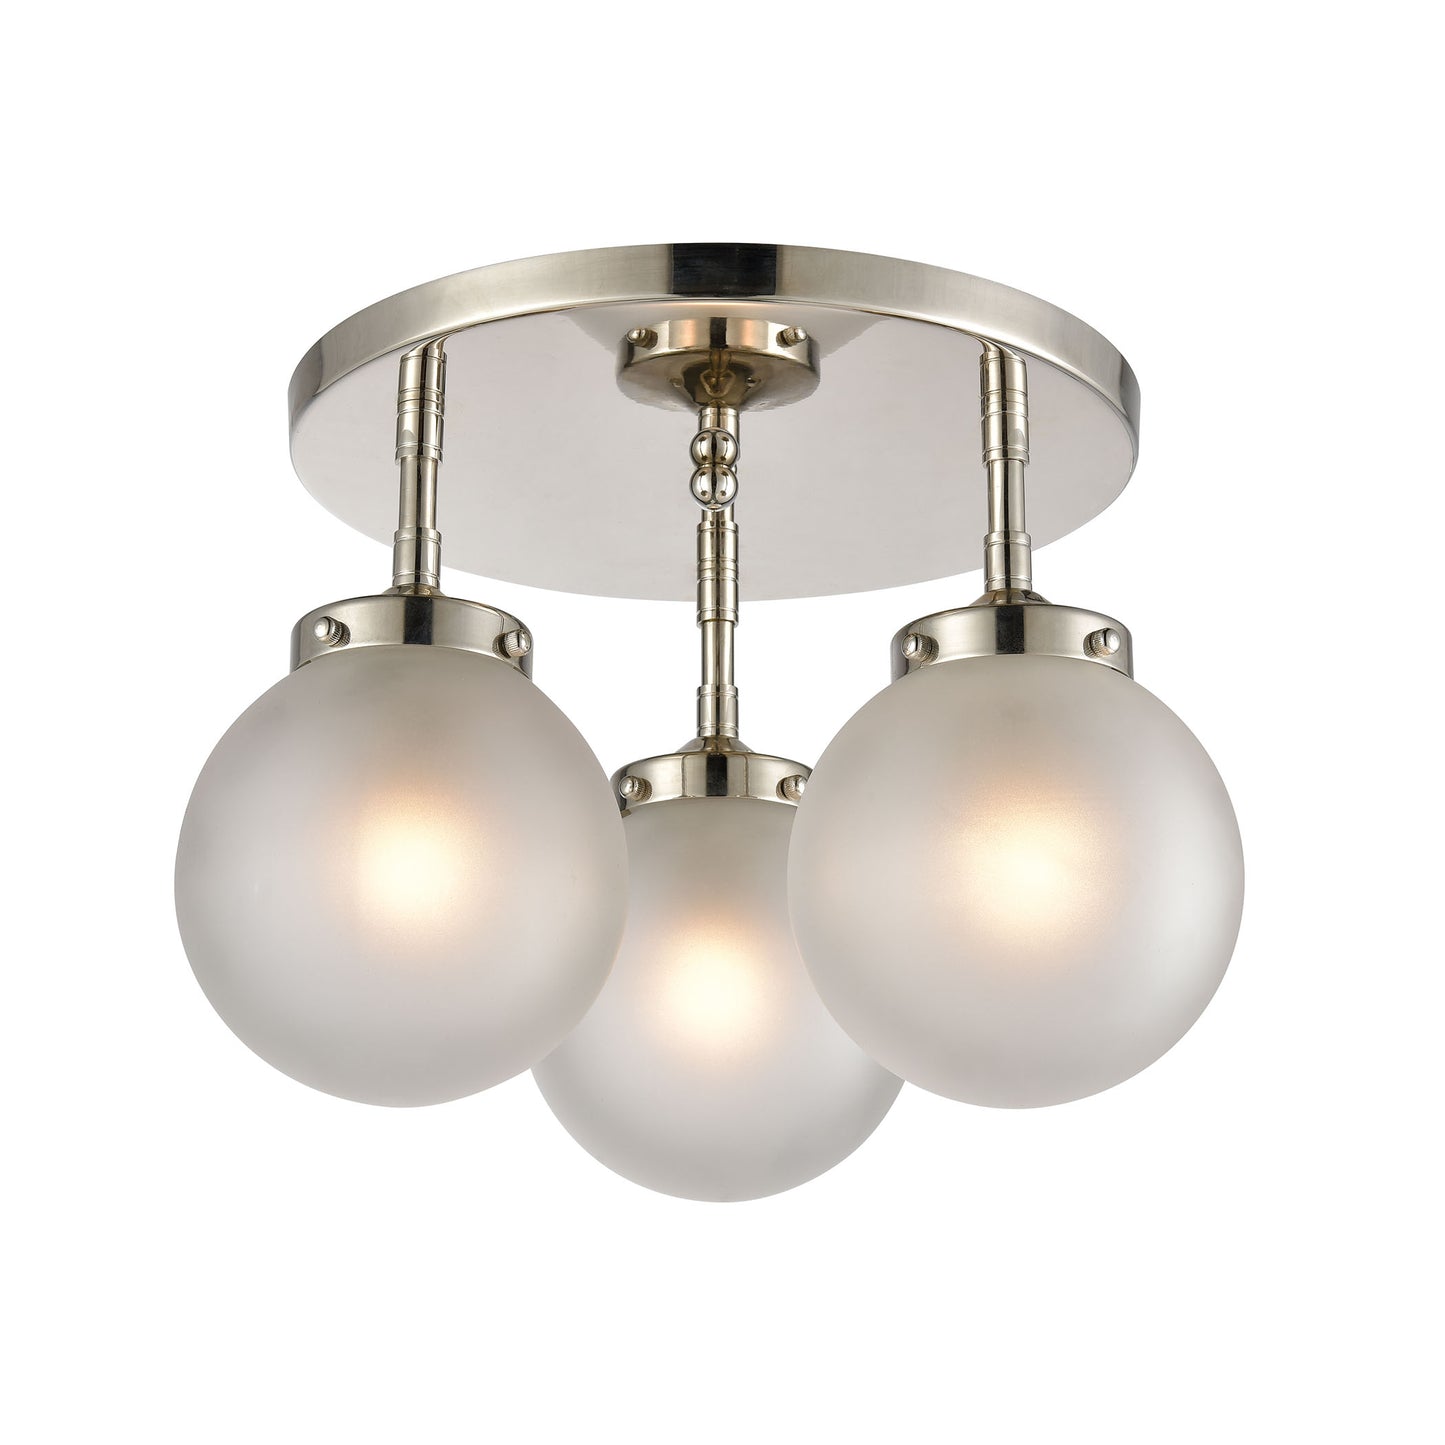 ELK Lighting 15362/3 - Boudreaux 15" Wide 3-Light Semi Flush Mount in Polished Nickel with Frosted